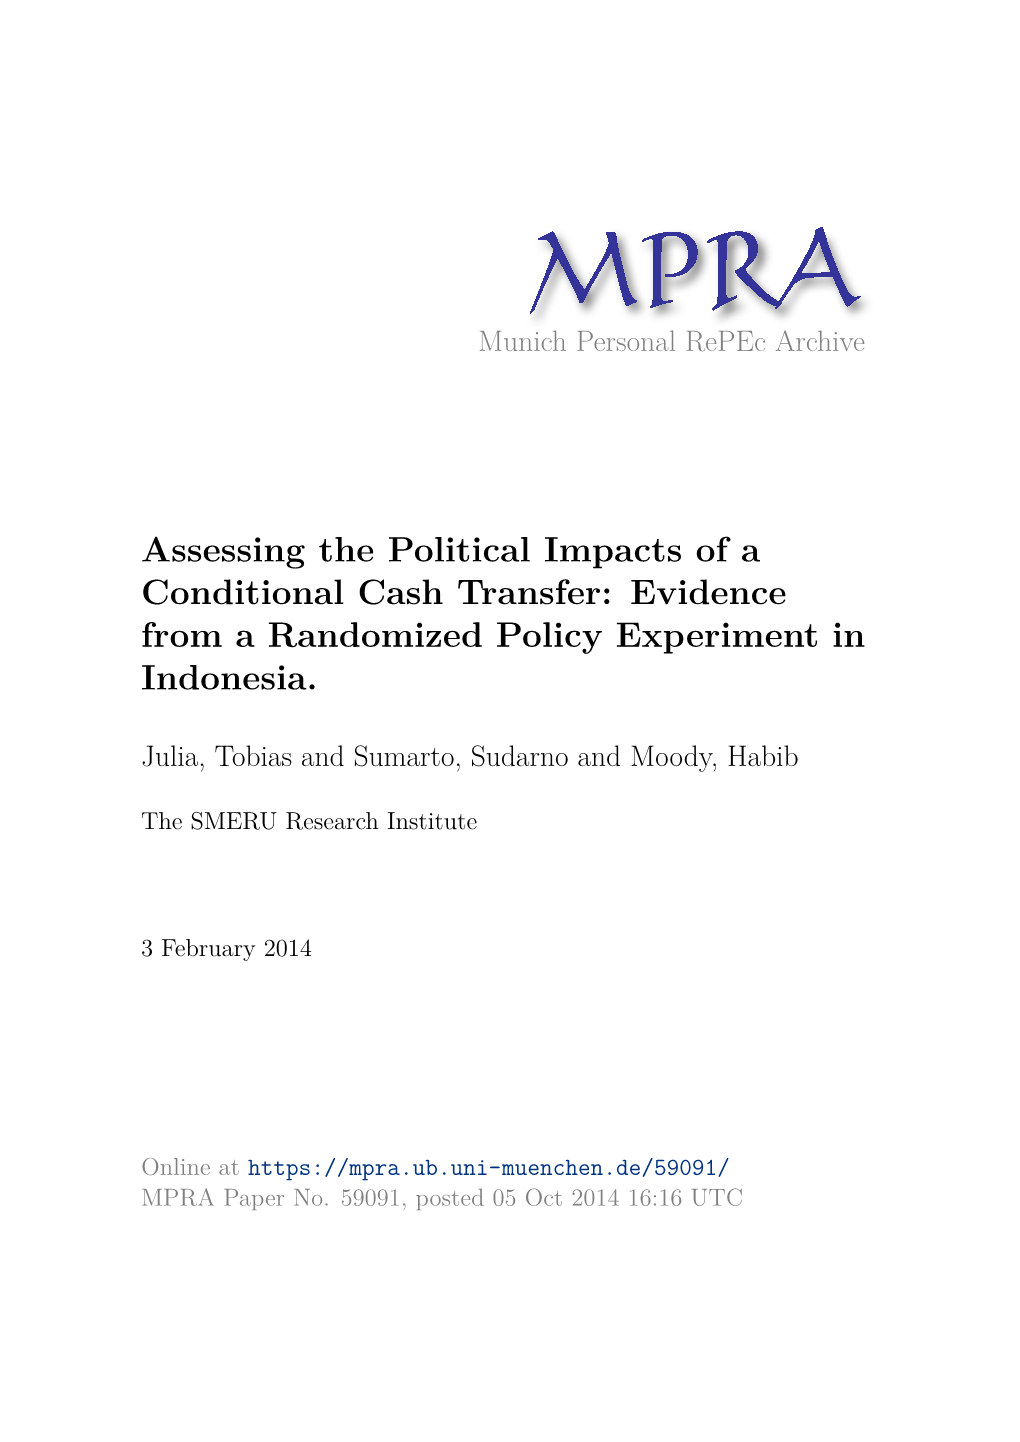 Assessing the Political Impacts of a Conditional Cash Transfer: Evidence from a Randomized Policy Experiment in Indonesia